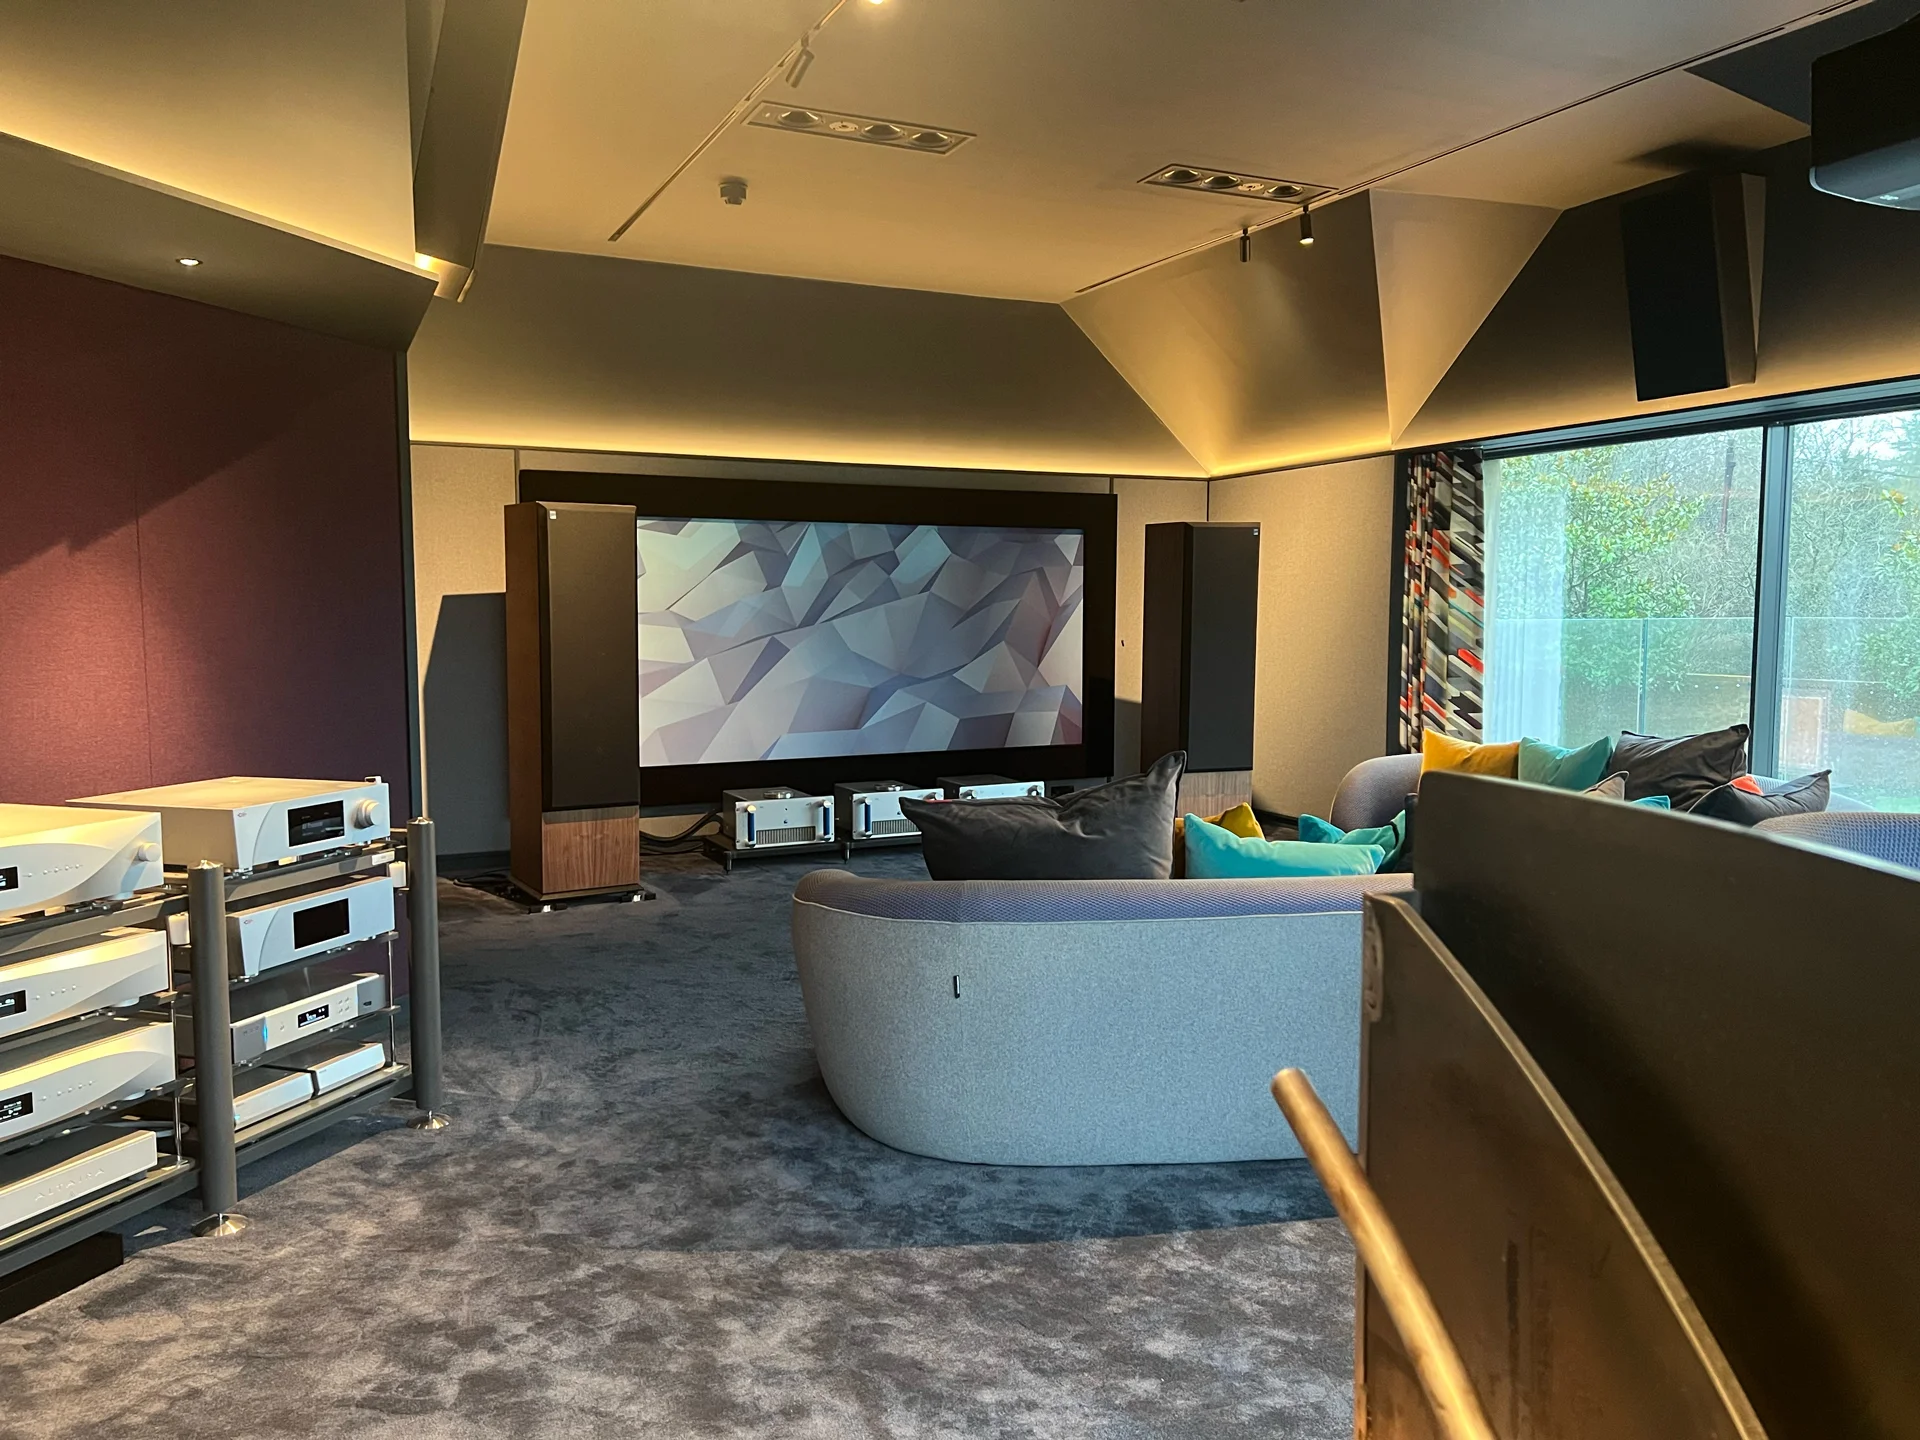 Walking into the finished Home Cinema, Music Room